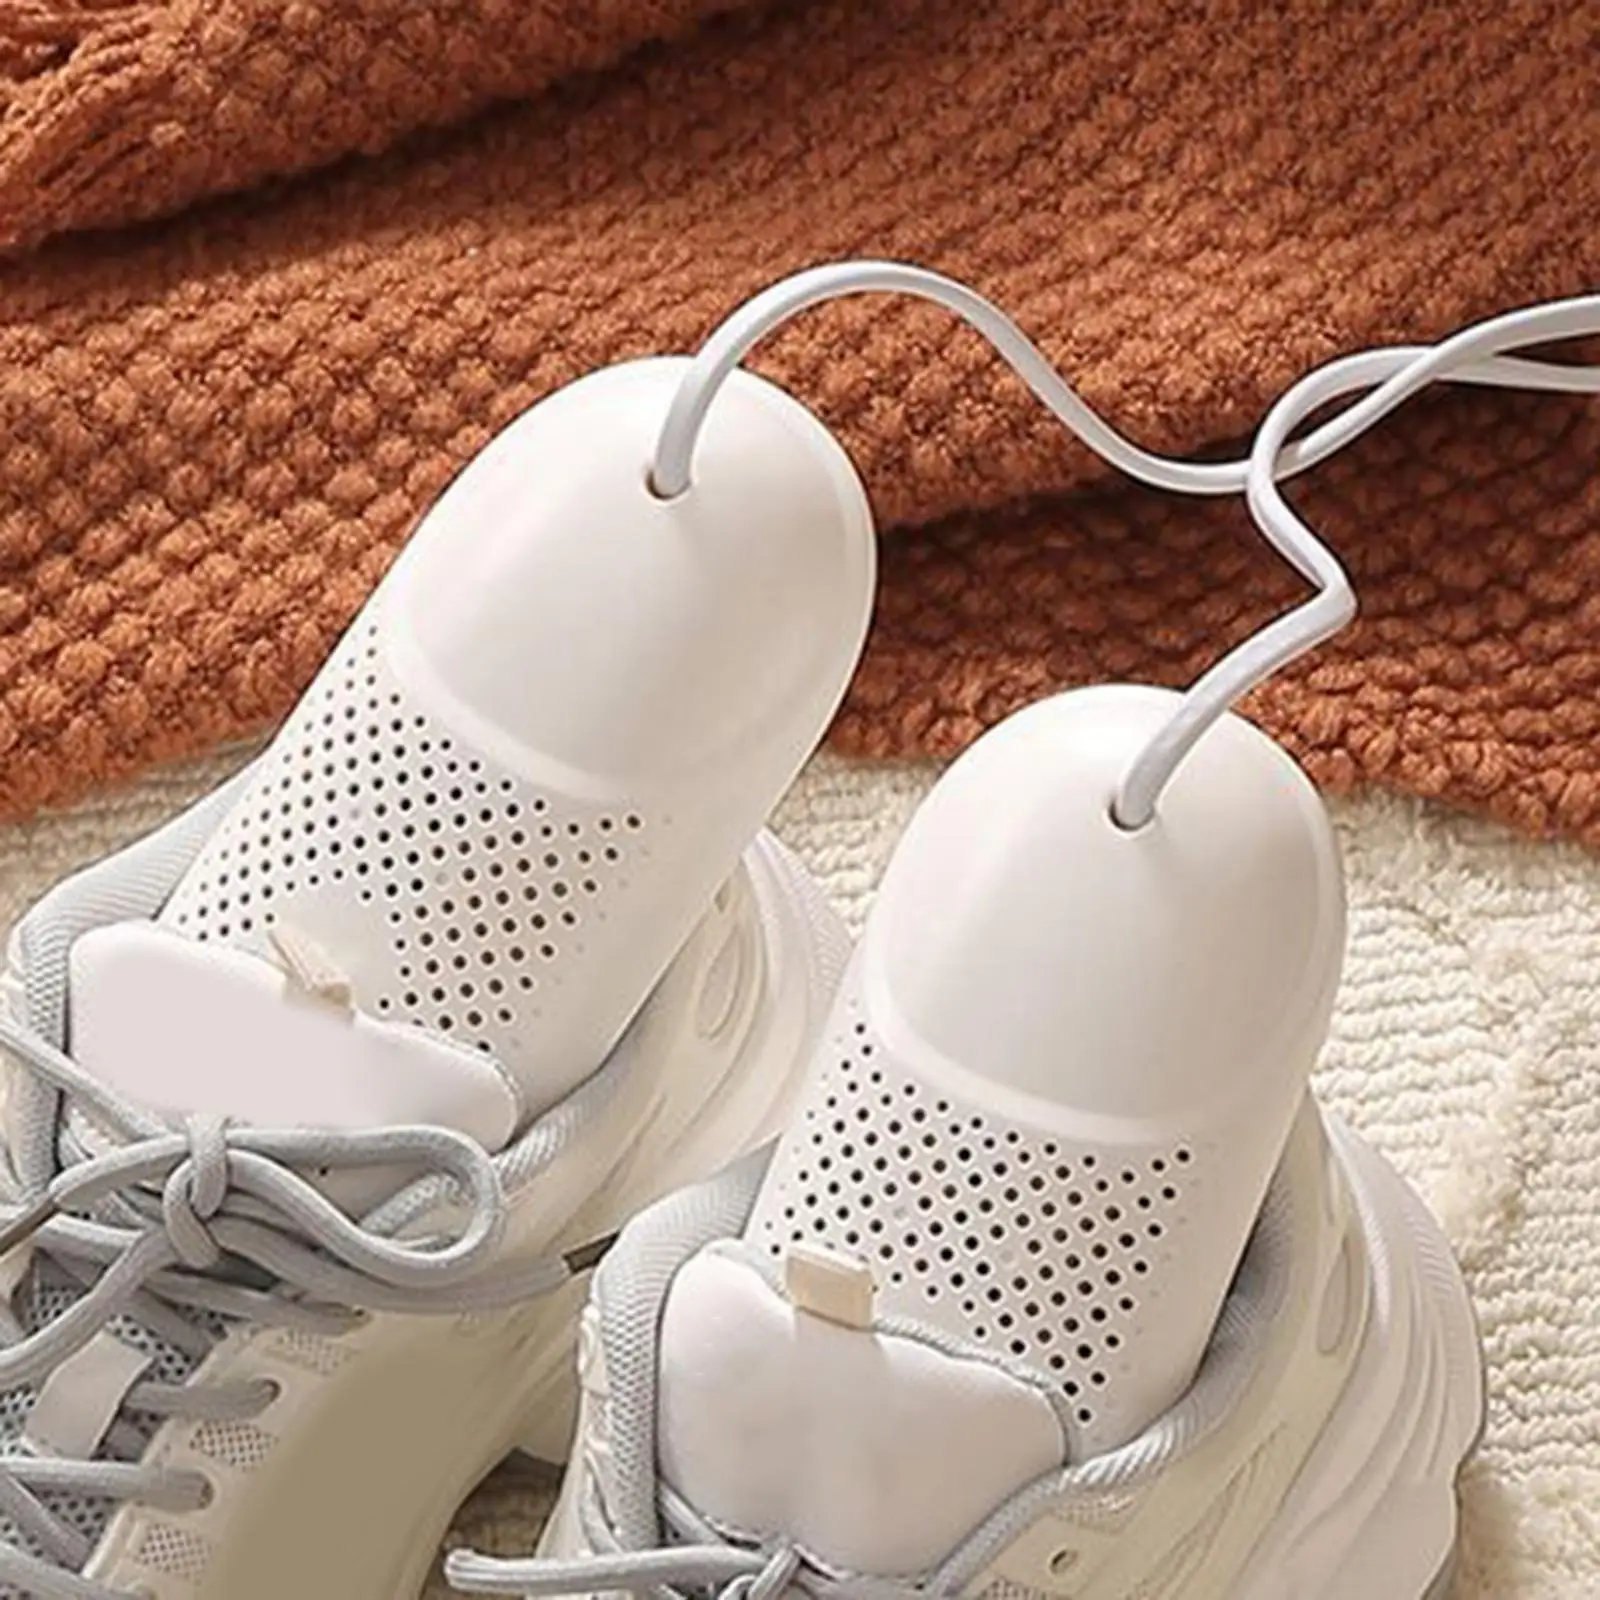 Portable Shoe Dryer Shoes Drier Dehumidify Device Boot Heater Electric for Family